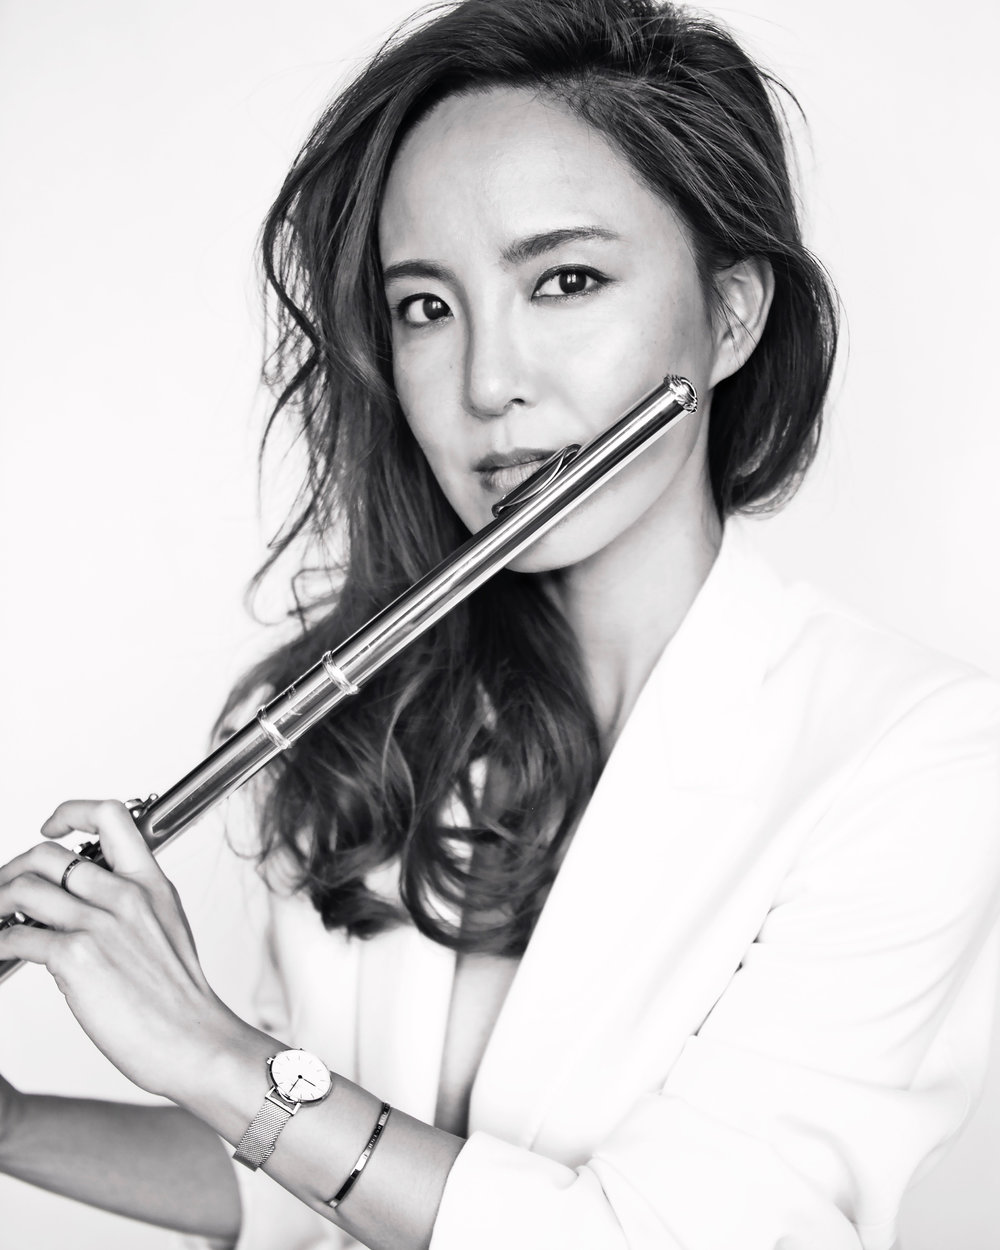 Jasmine Choi will accompany the Maltaphil with flute